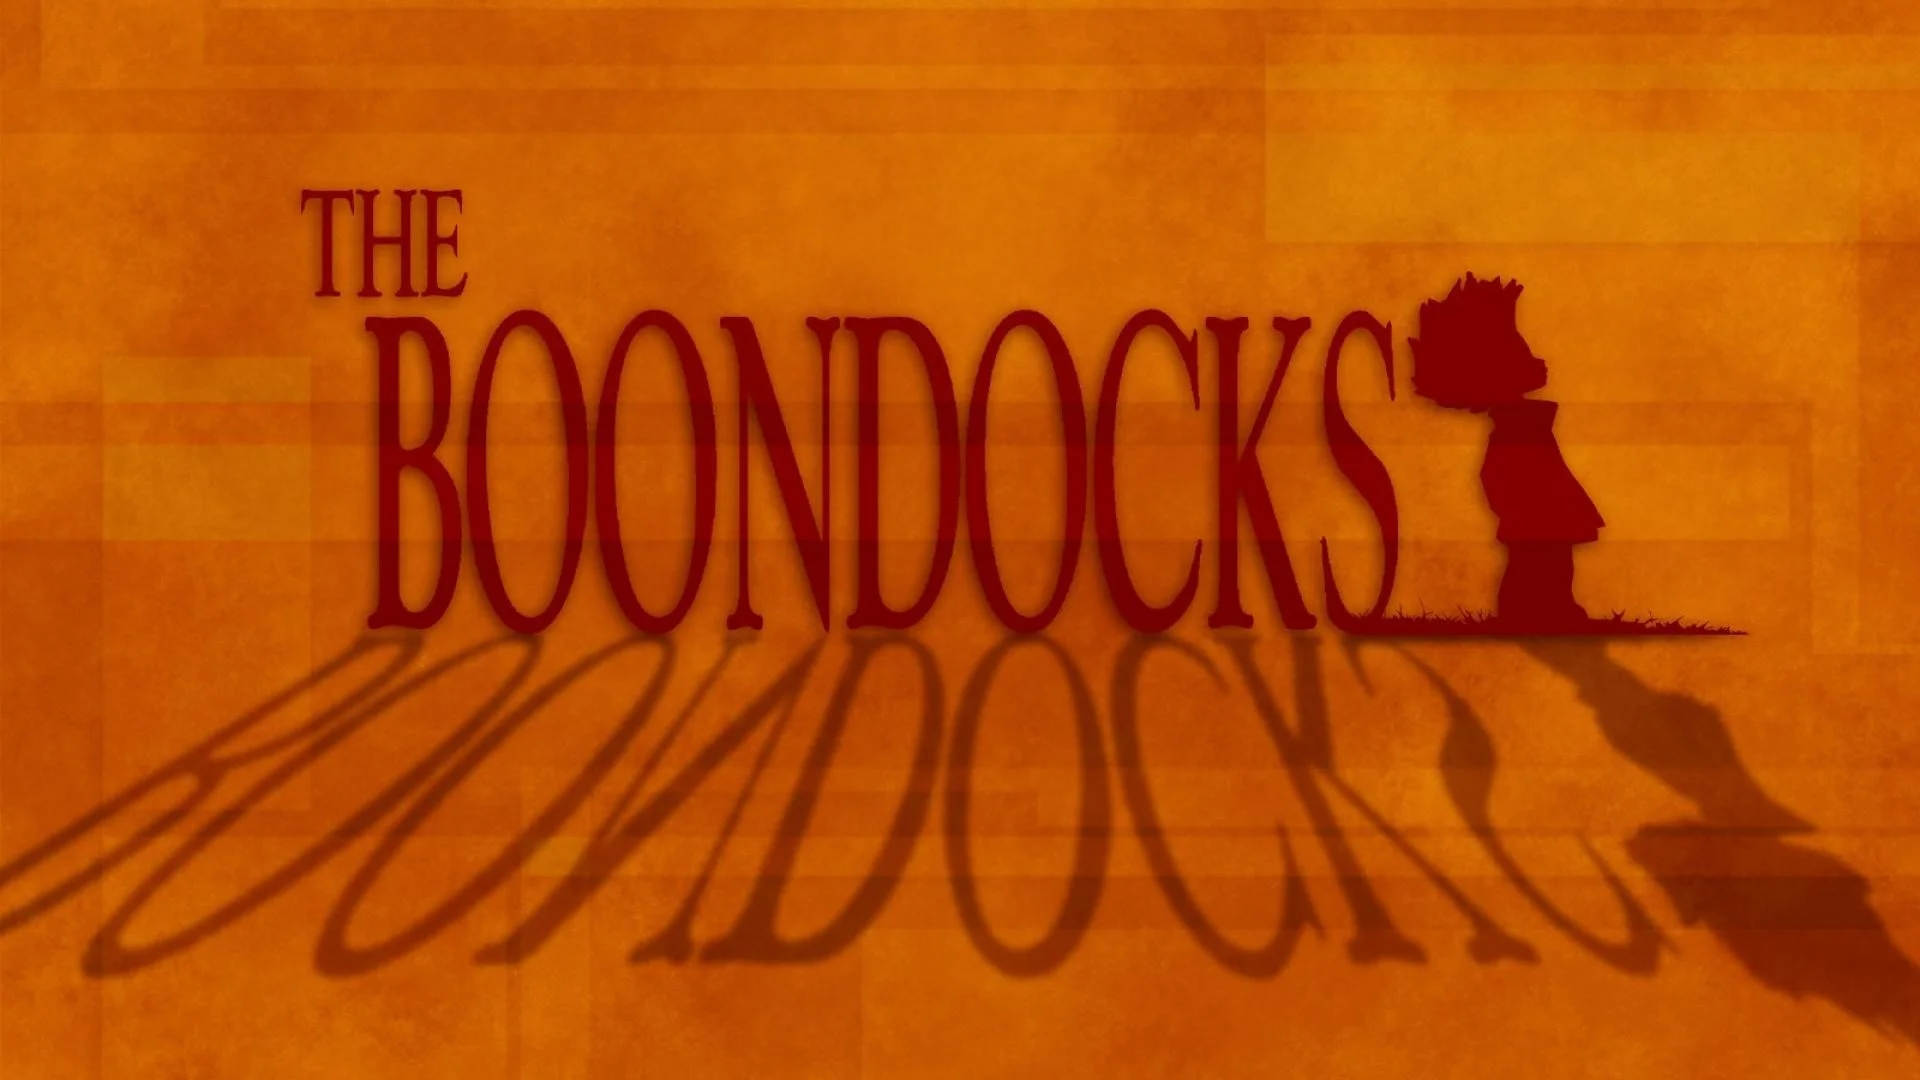 the boondocks american animated series poster hd wallpaper . …